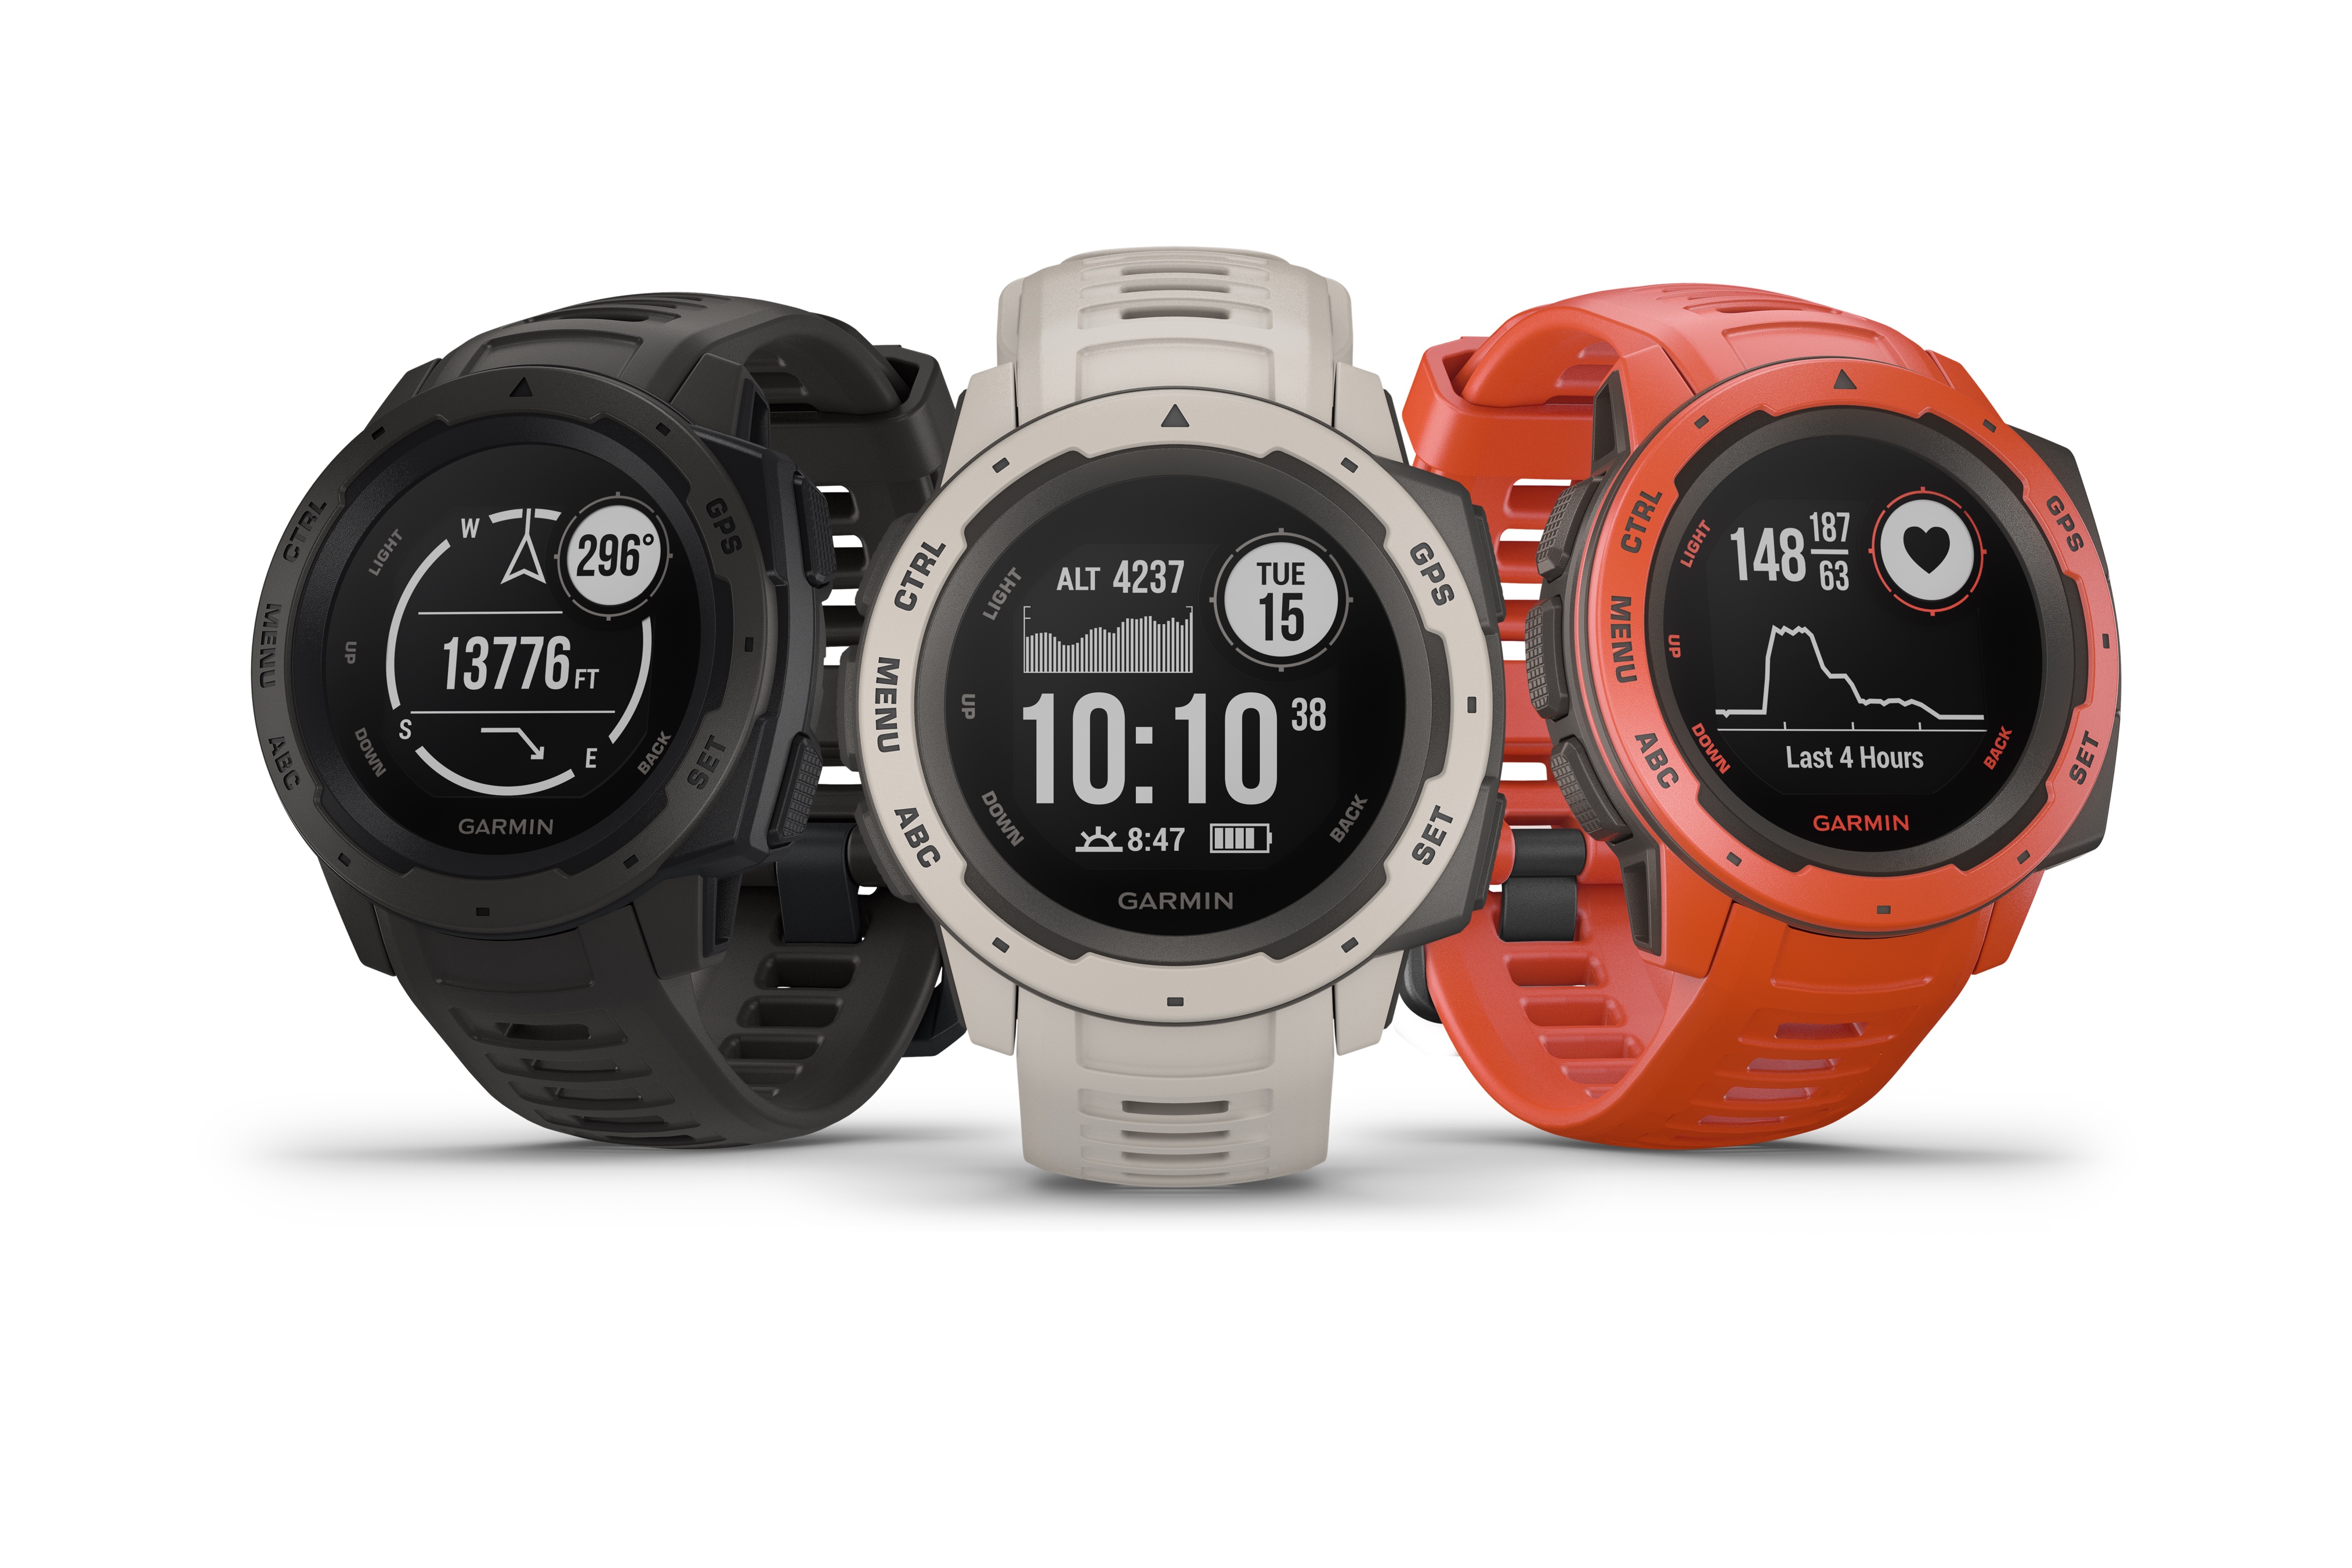 New Garmin Instinct Is a GPS Watch for the Rugged Outdoorsman